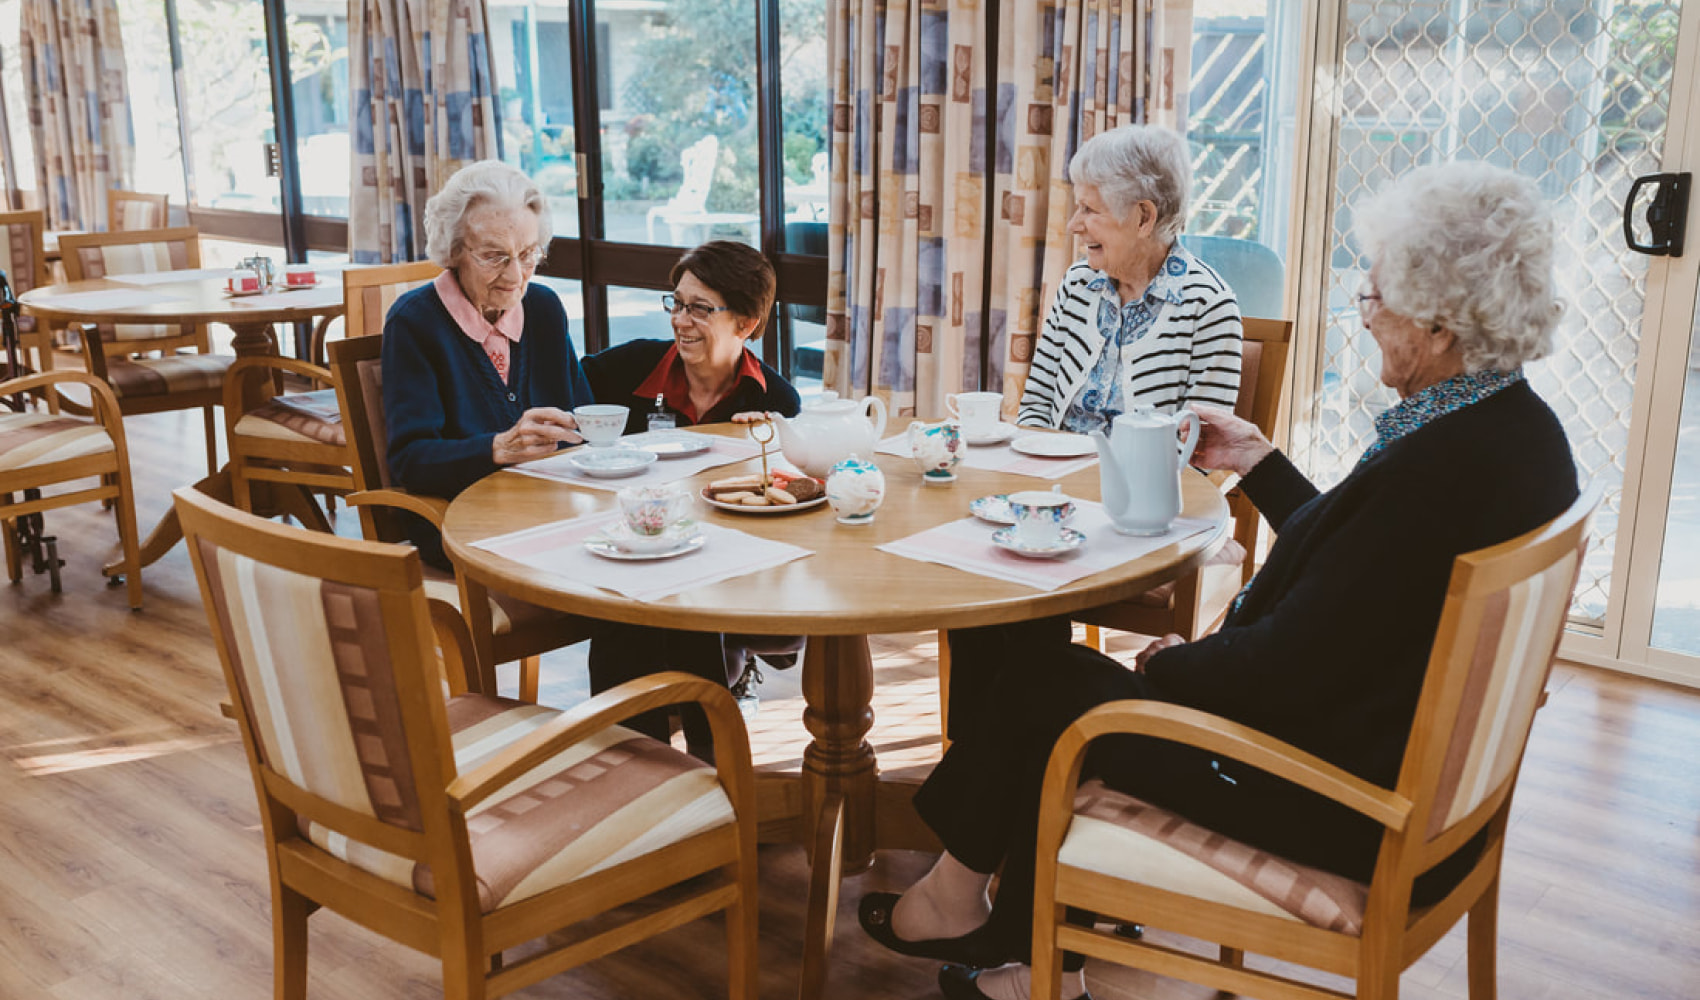 3 female residents and a female staff member are happily enjoying afternoon tea together around a round table. They are seated in an airy room with lots of sunlight. The women are laughing. 